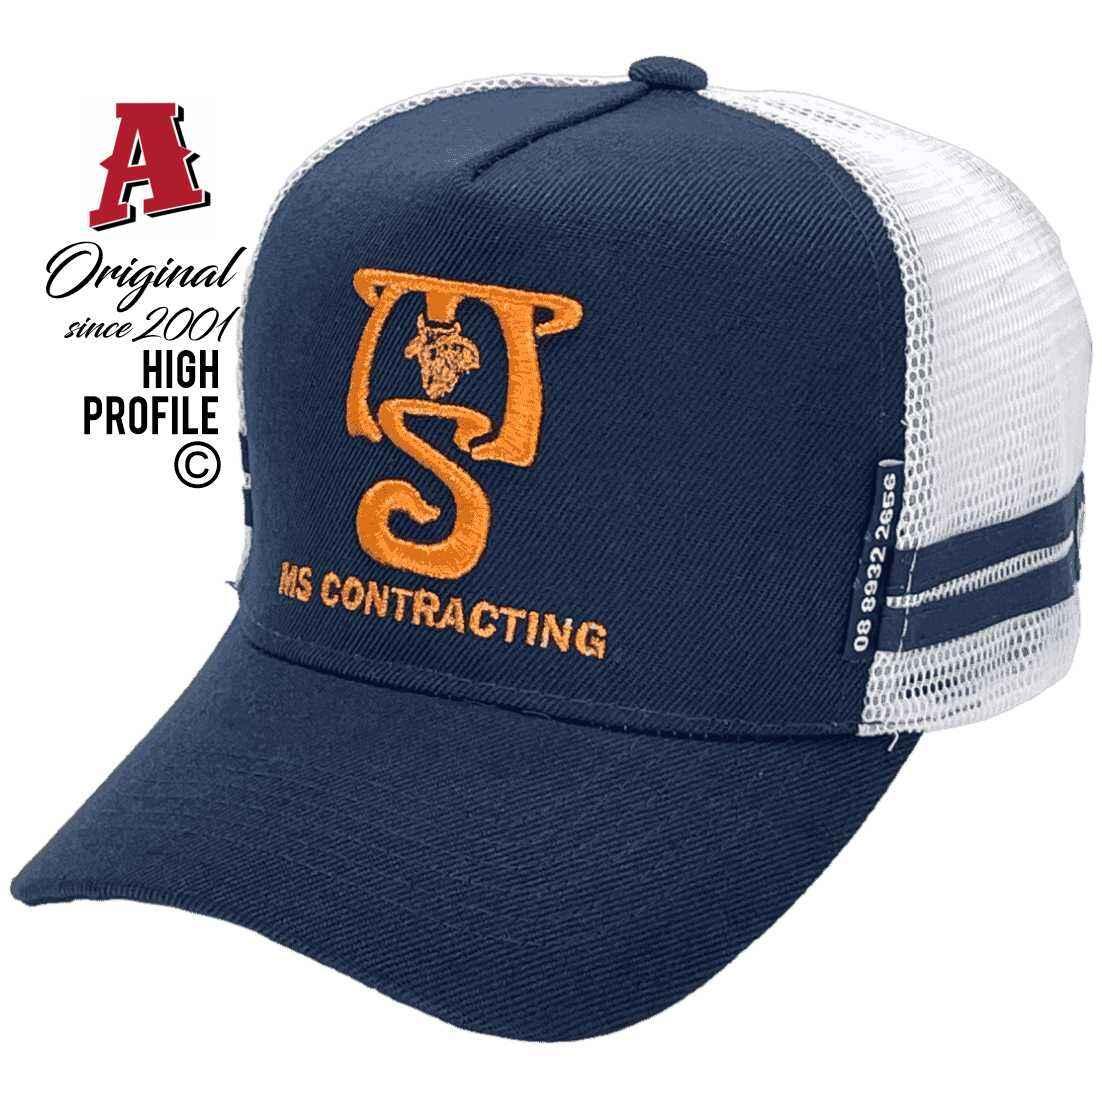 MS Contracting Humpty Doo NT Basic Aussie Trucker Hats with Australian HeadFit Crown 2 SideBands Navy White Snapback